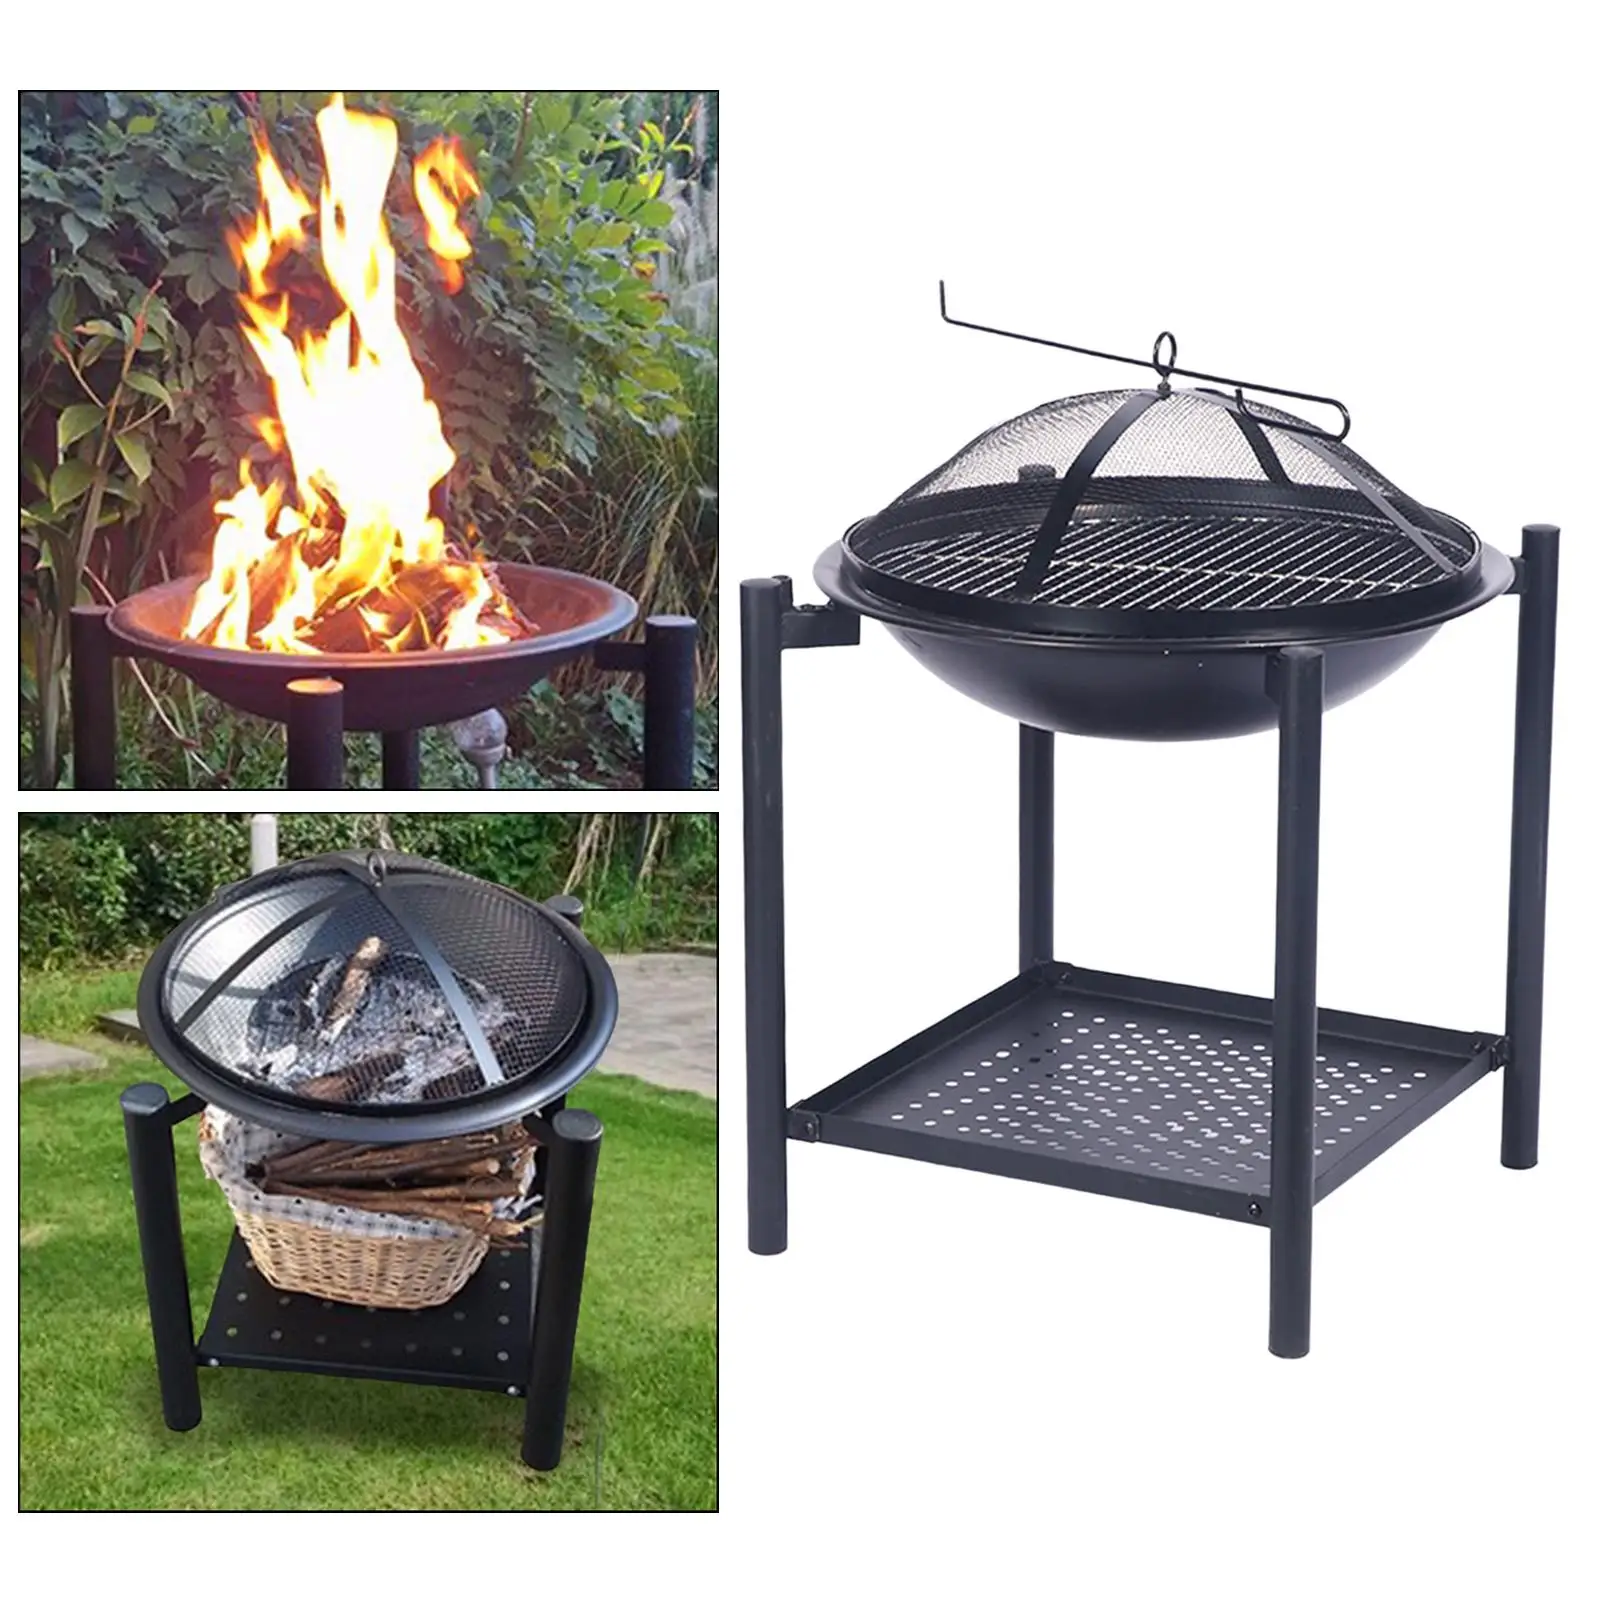 Fire Pit with Cover with Brazier Fireplace for Barbecue Patio Outdoor